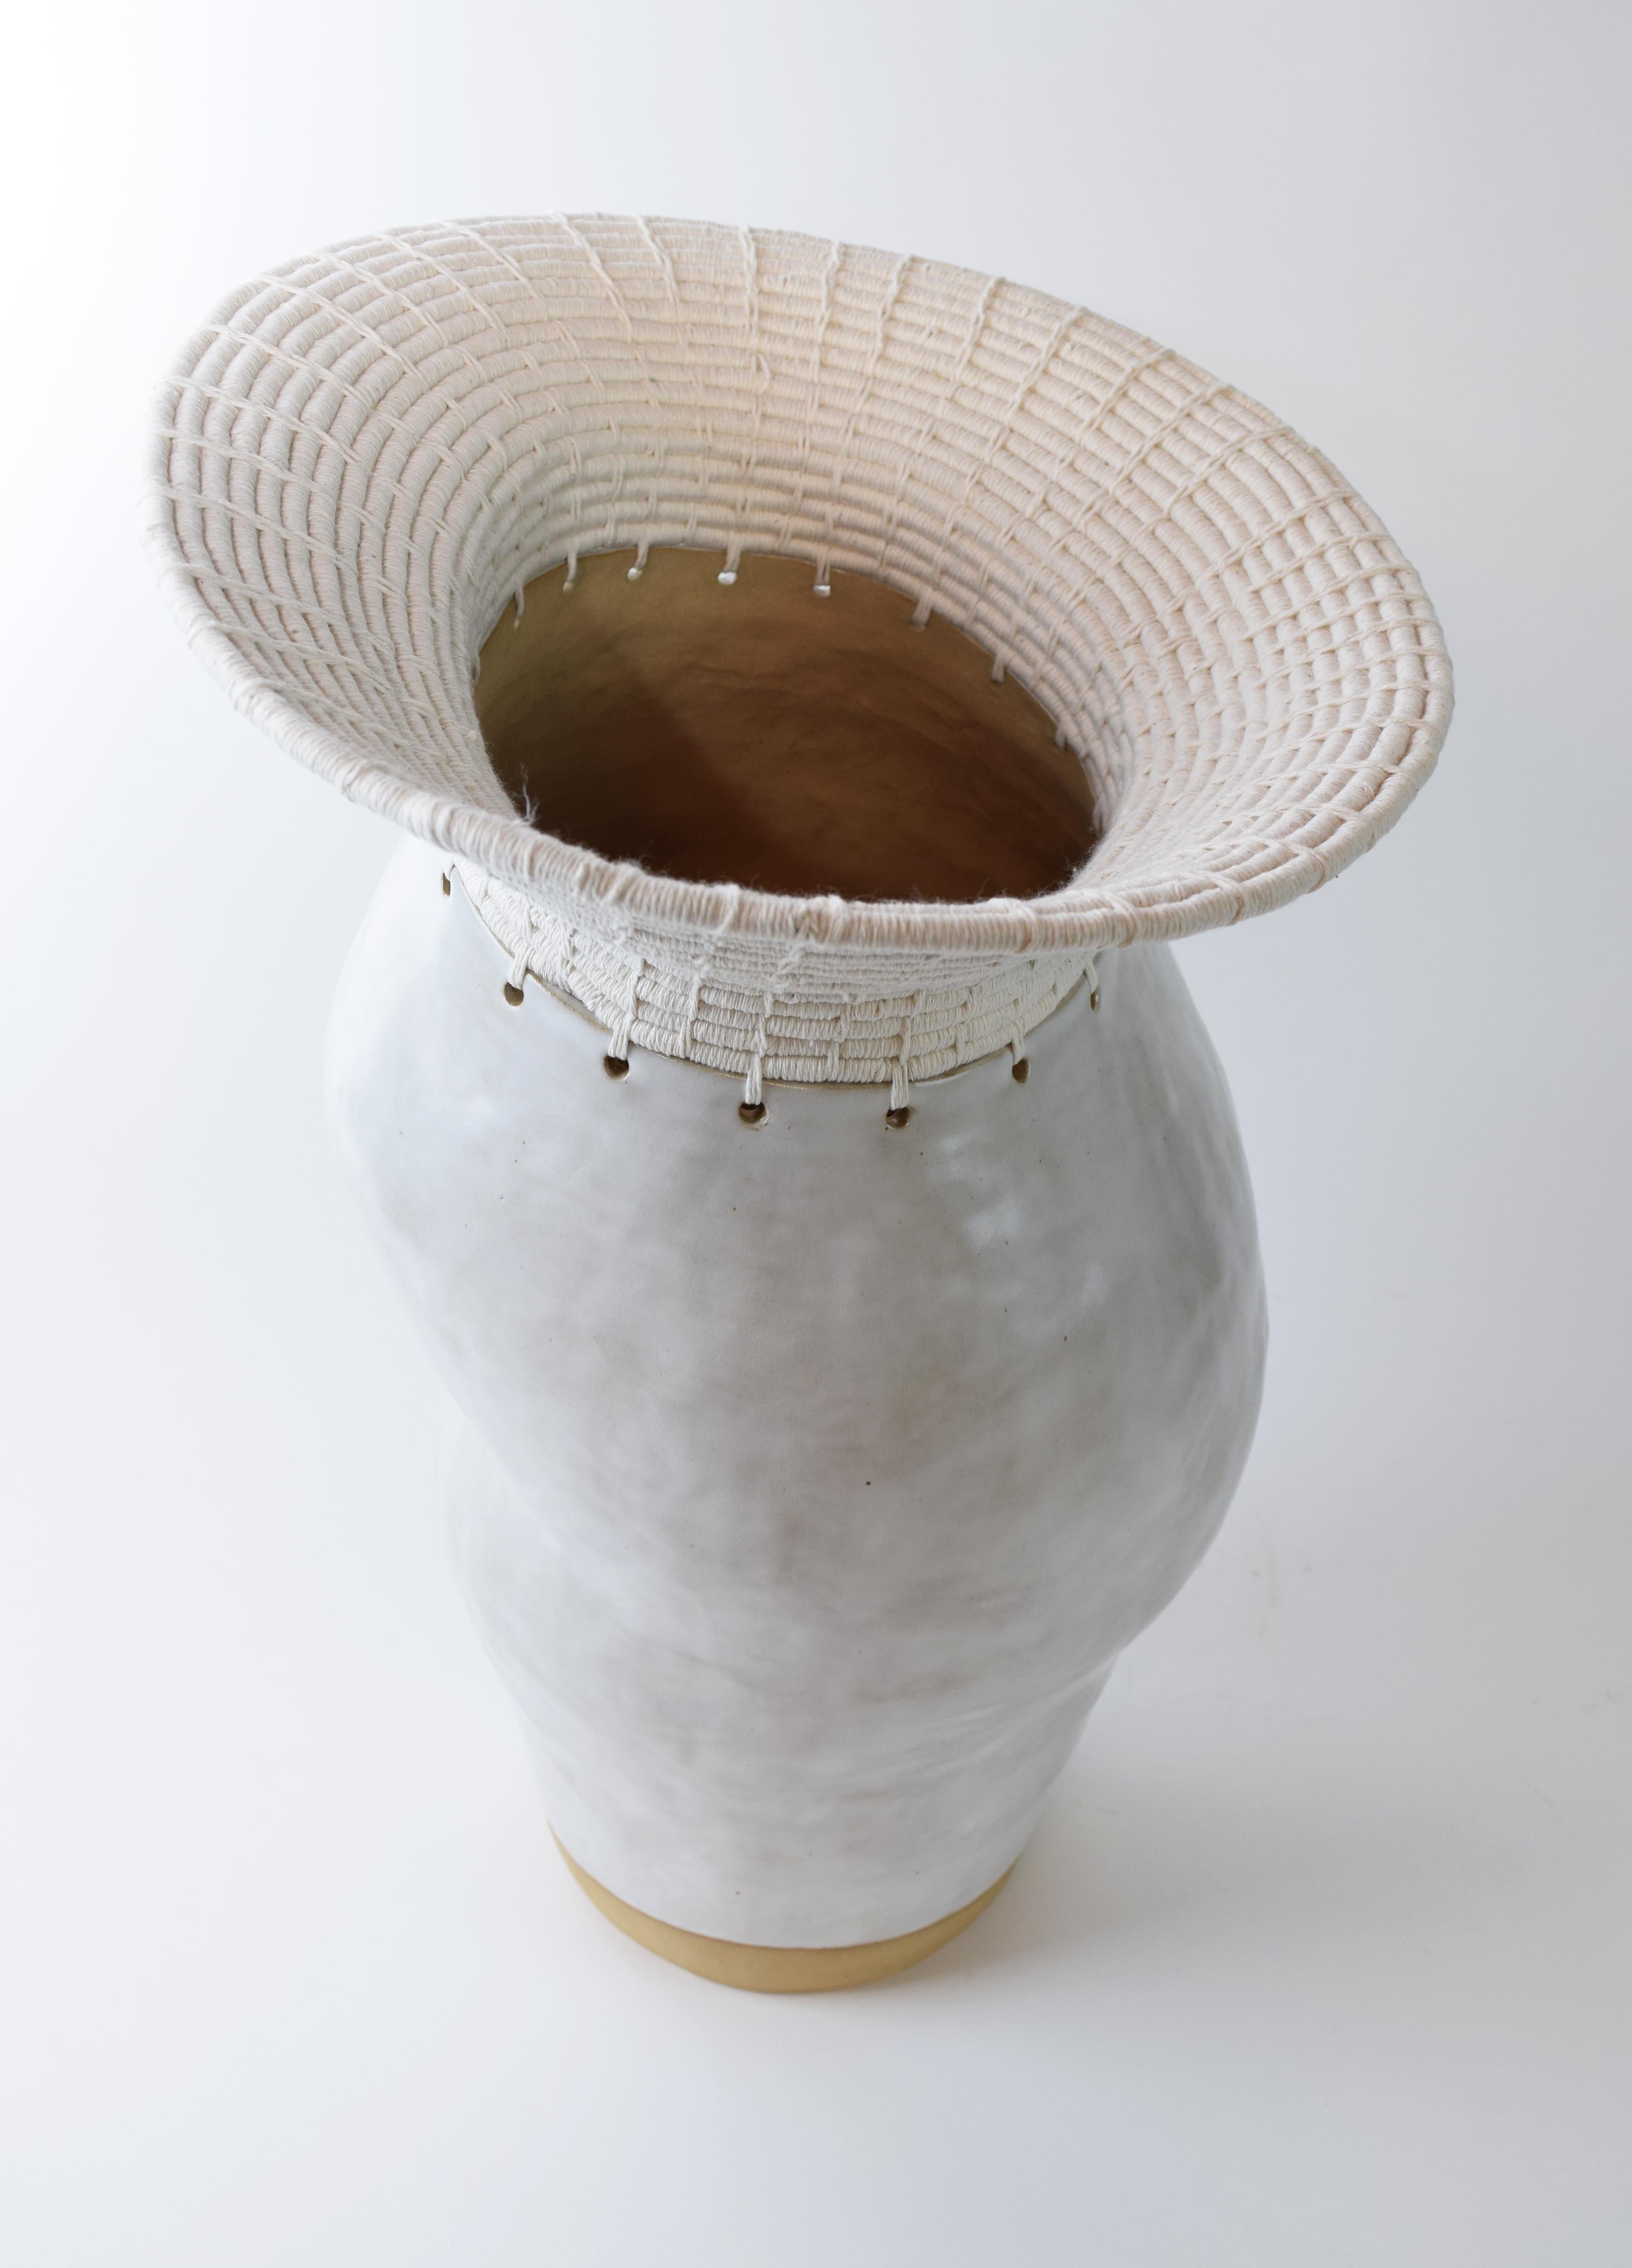 American One of a Kind Asymmetrical Ceramic Vessel #771, White Glaze and Woven Cotton For Sale